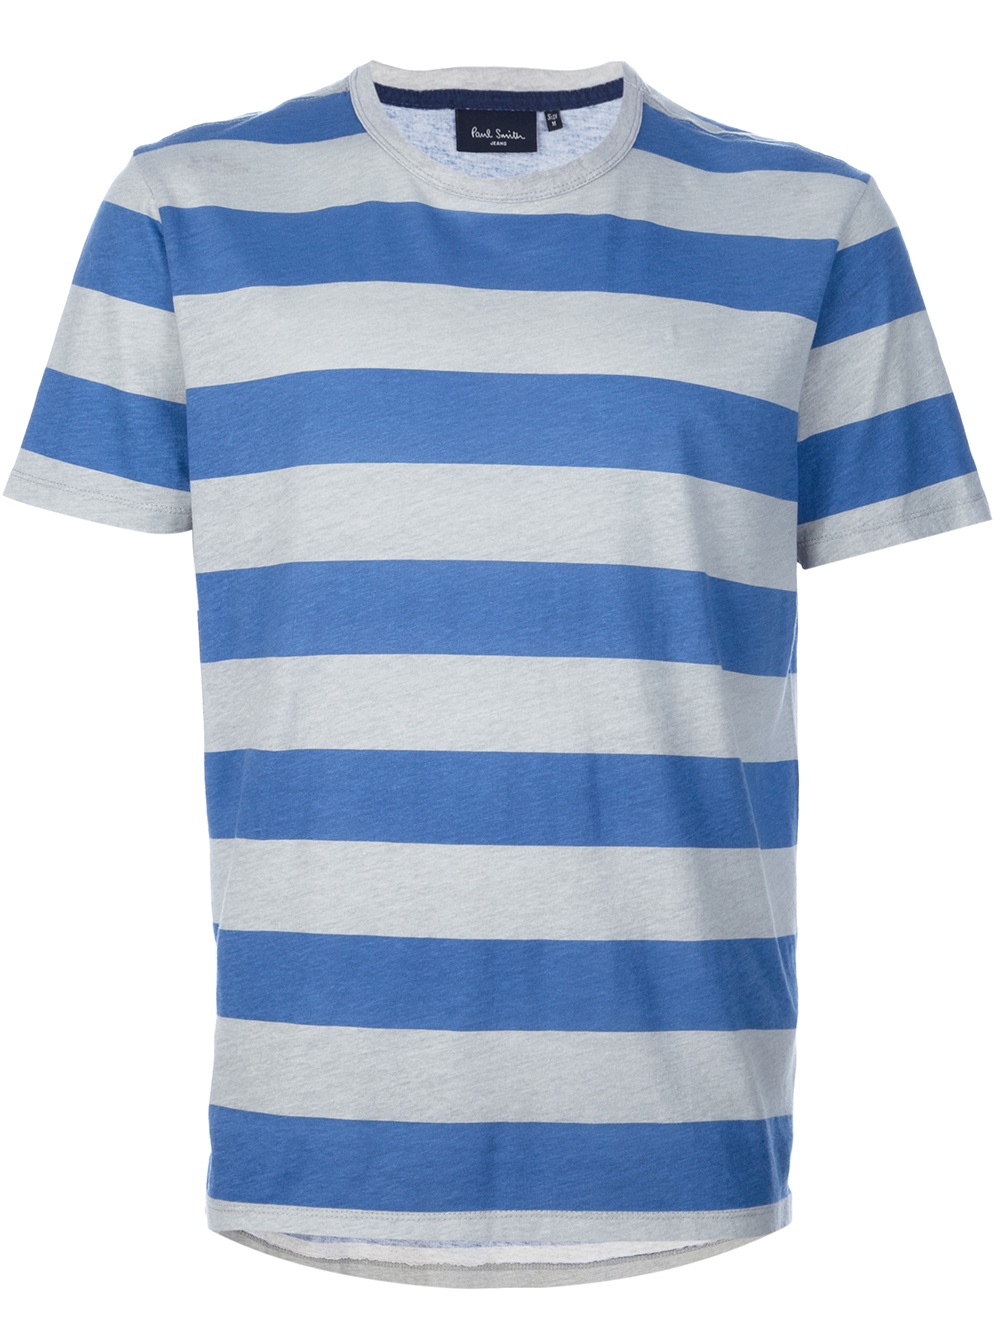 Paul Smith Thick Striped Tshirt in Blue for Men - Lyst